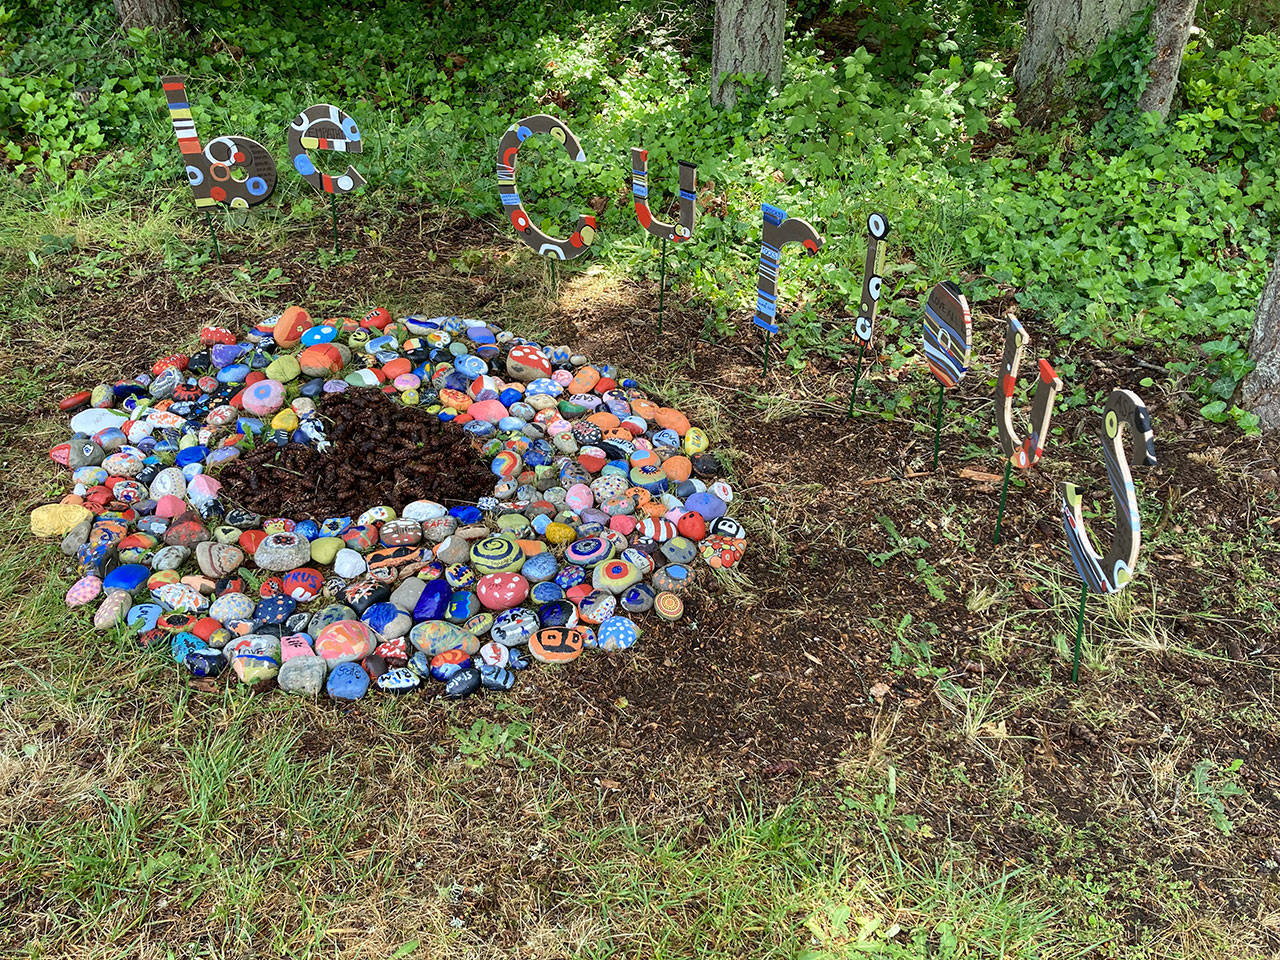 Guided by island artist Britt Freda, students installed painted rocks at the entrance to the school on Cemetery Road. A public unveiling of the exhibit, “BE CURIOUS: compassion and kindness rocks!” took place earlier this month (April M. Wilkinson Photo).